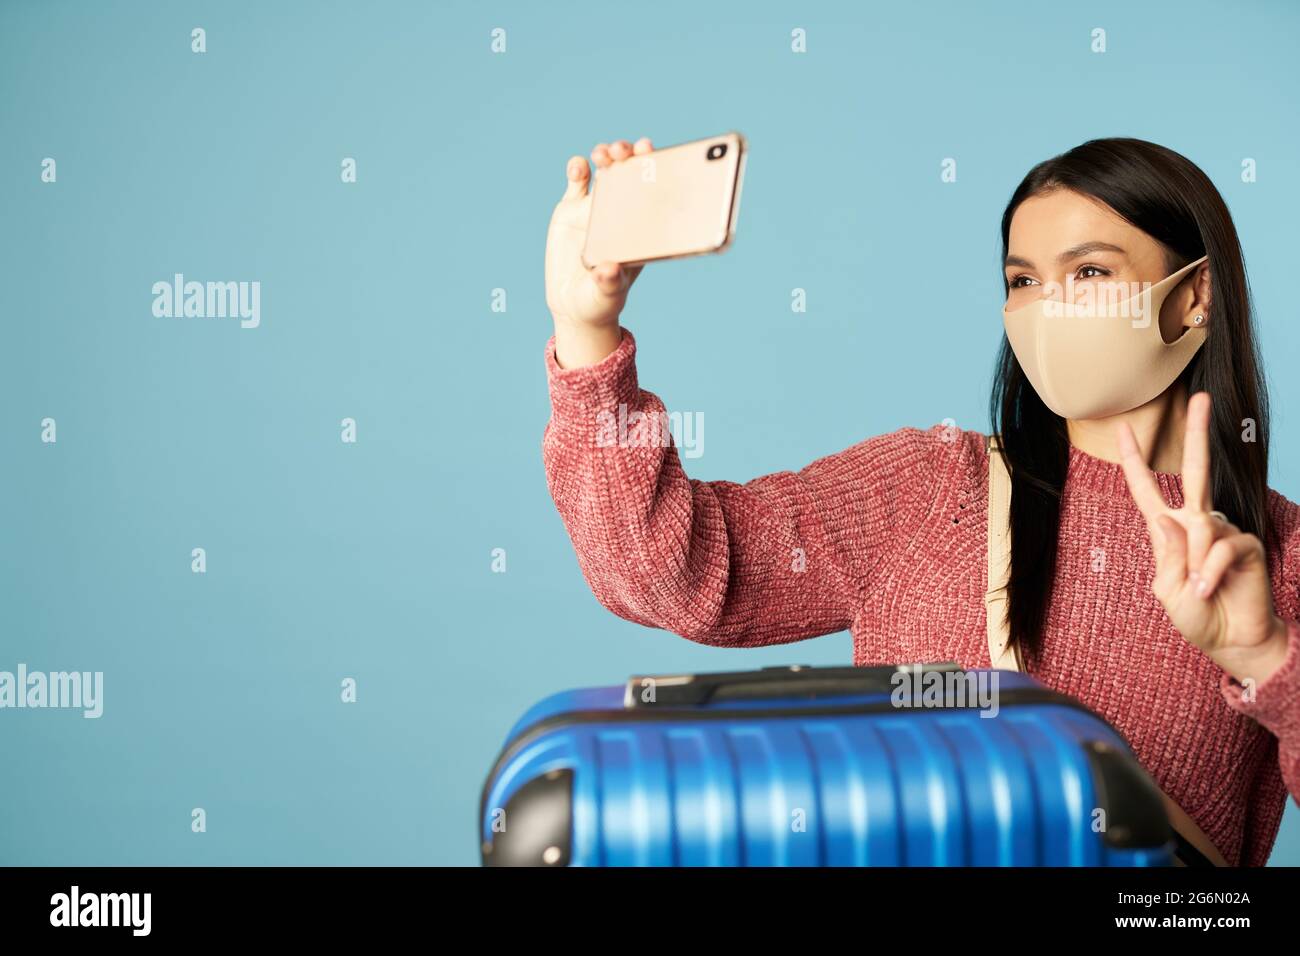 Young lady taking selfie while holding mobile phone Stock Photo